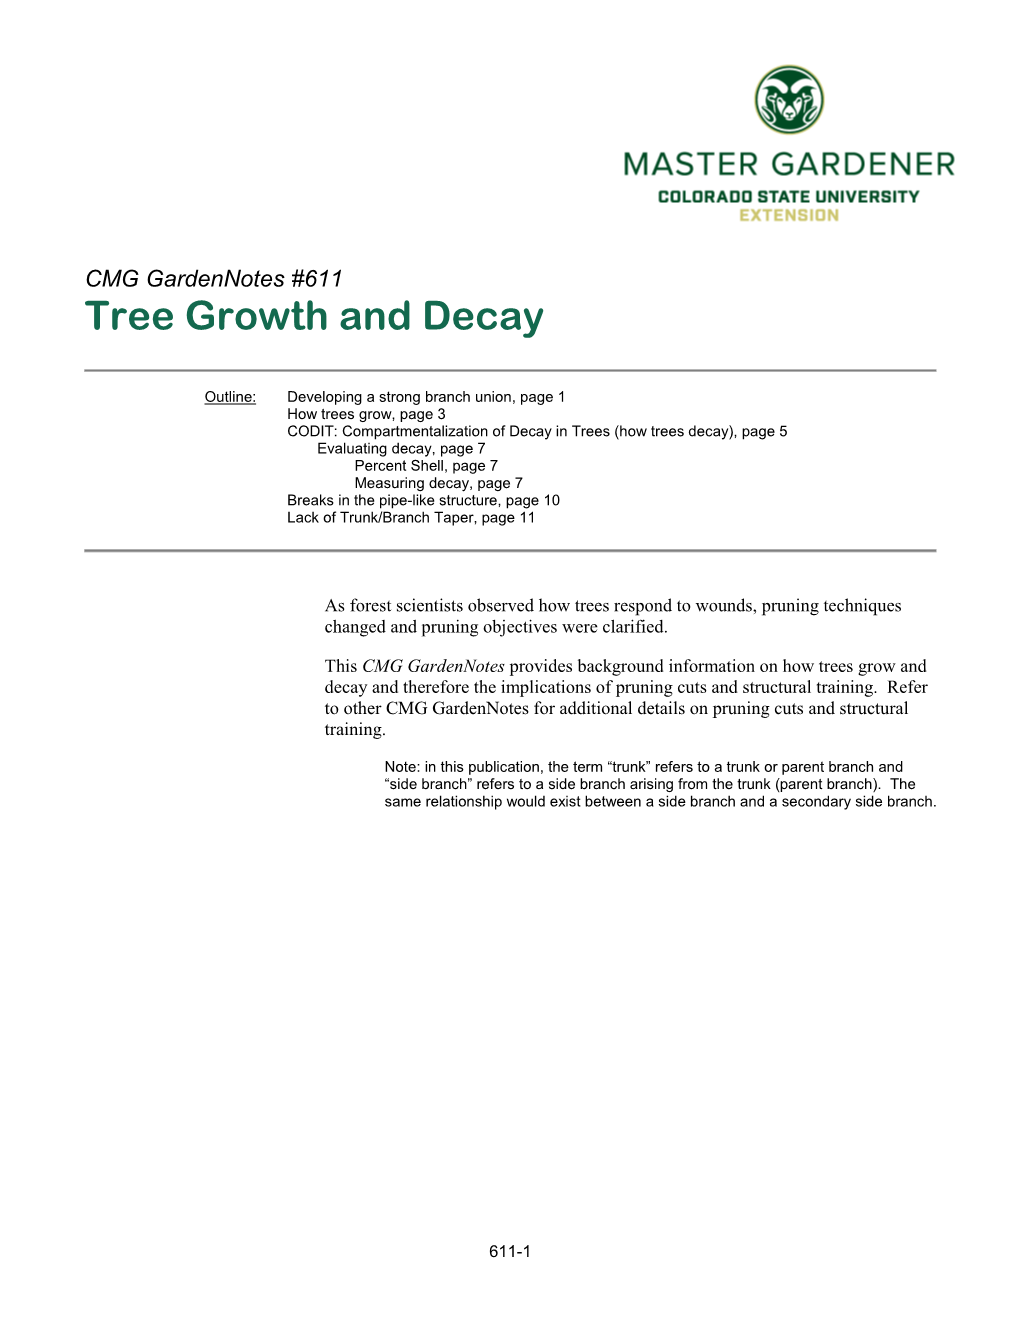 Tree Growth and Decay